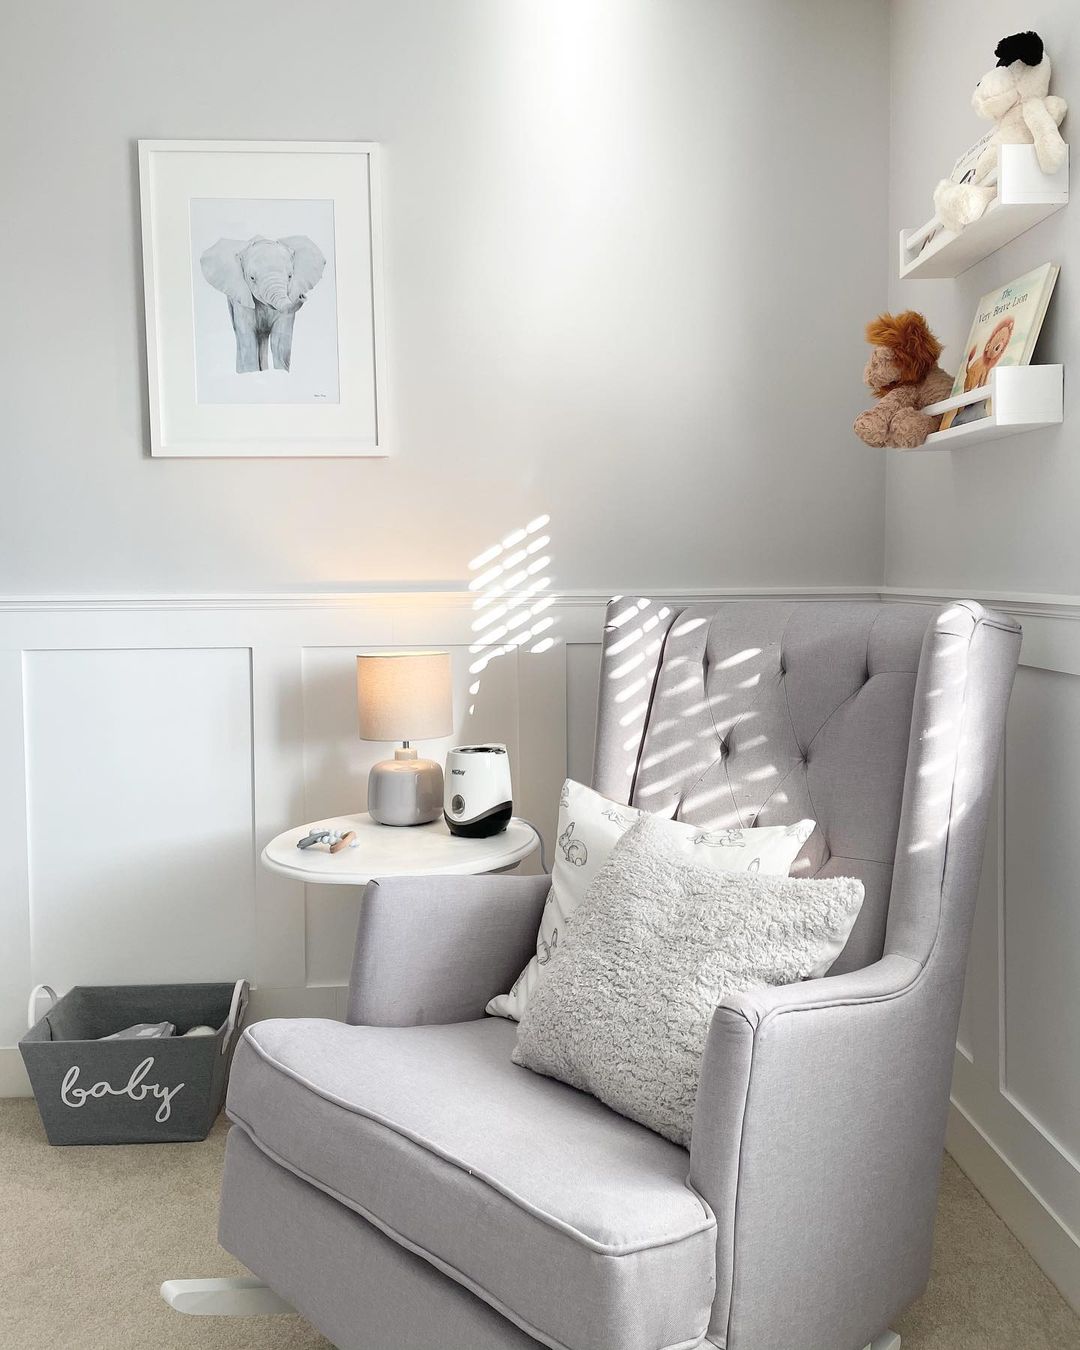 A baby room with a gray nursery chair. Photo by Instagram user @jessicalouise.home